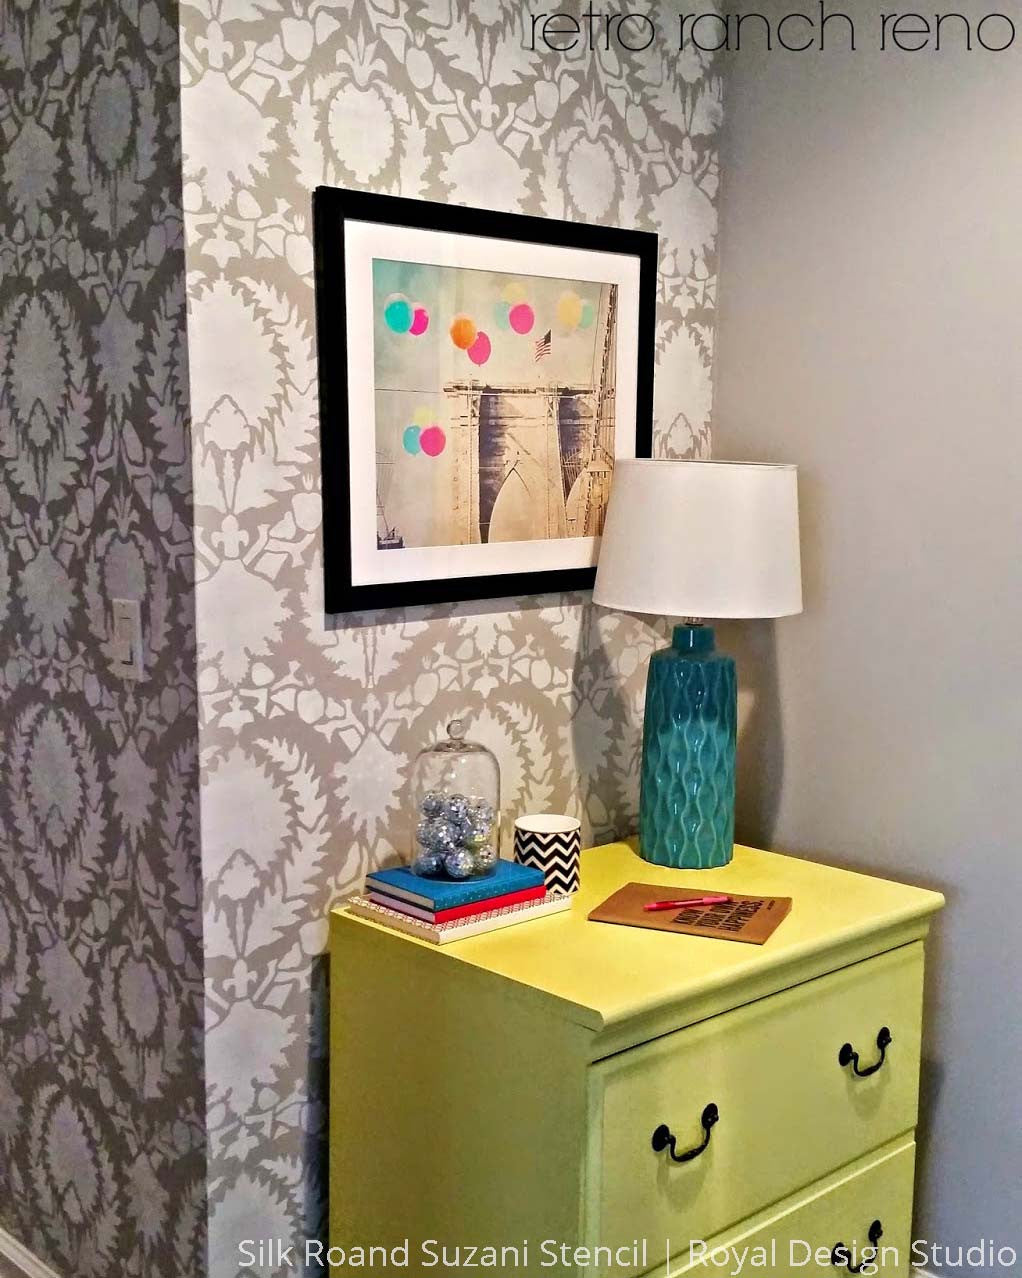 Modern Fabric Damask Wallpaper Look but Painted with Suzani Wall Stencils - Royal Design Studio